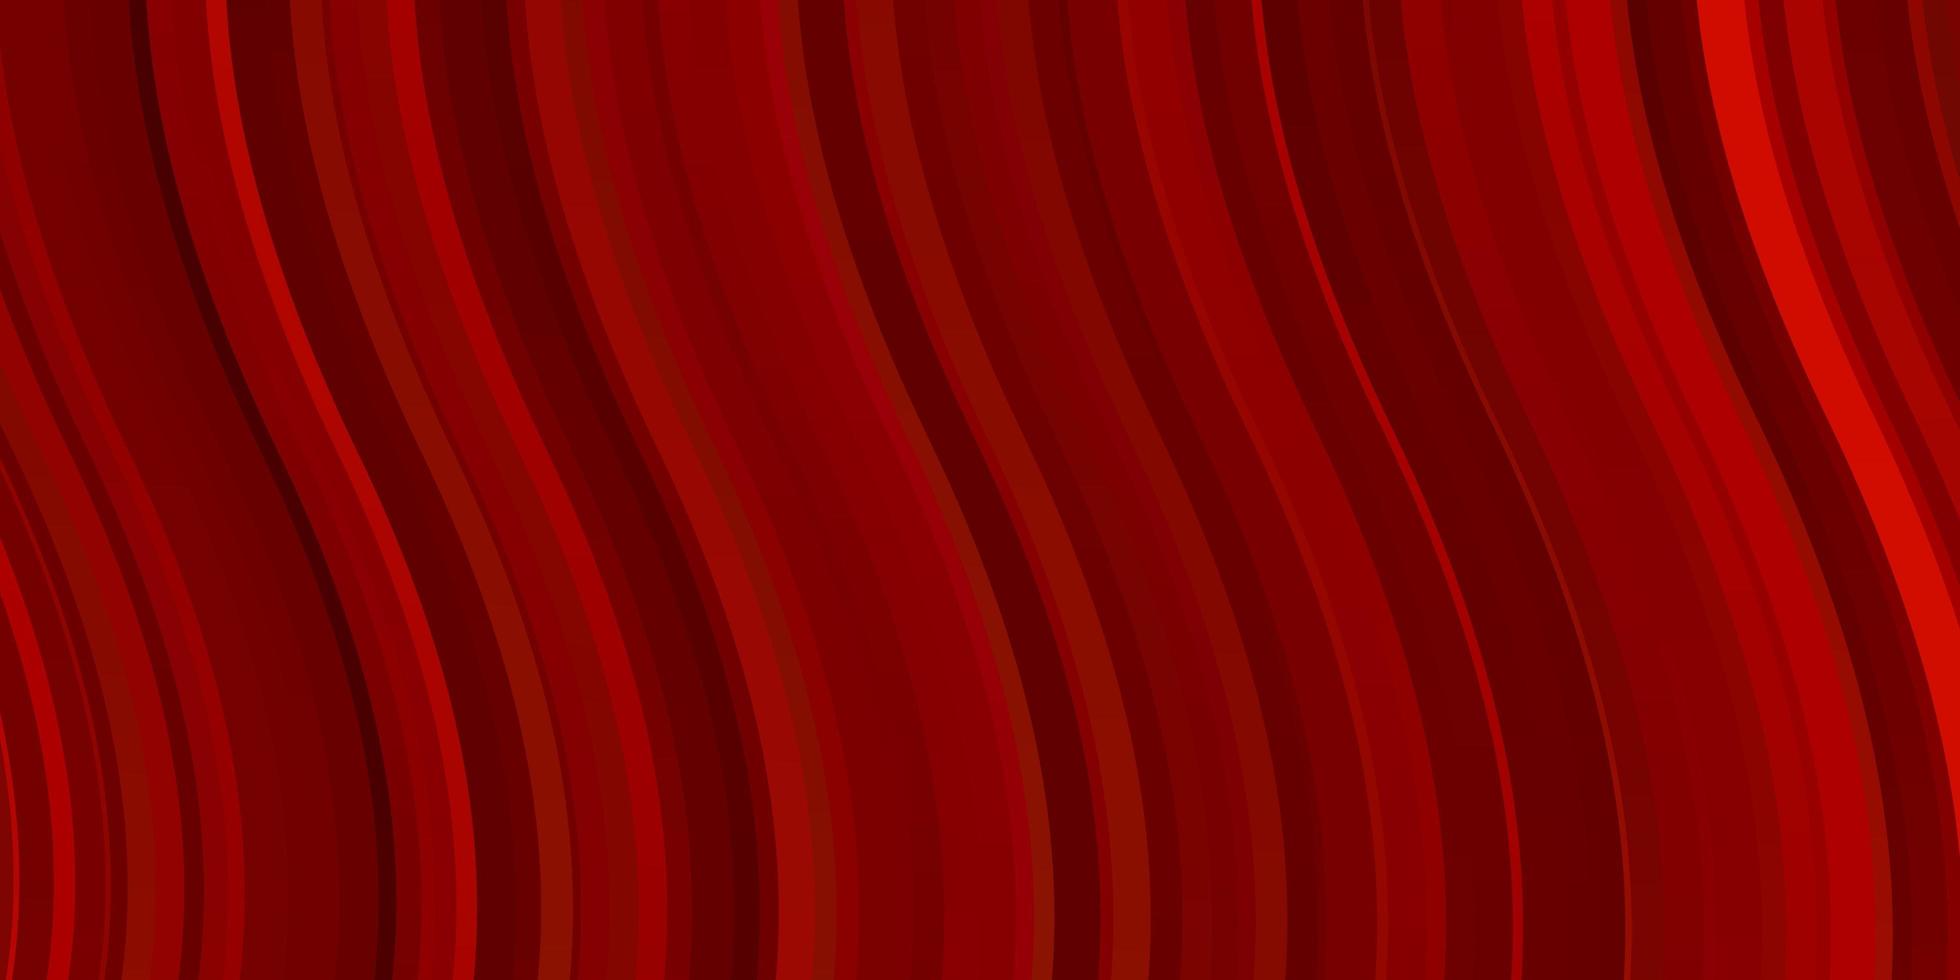 Light Red vector backdrop with curves. Bright sample with colorful bent lines, shapes. Pattern for commercials, ads.